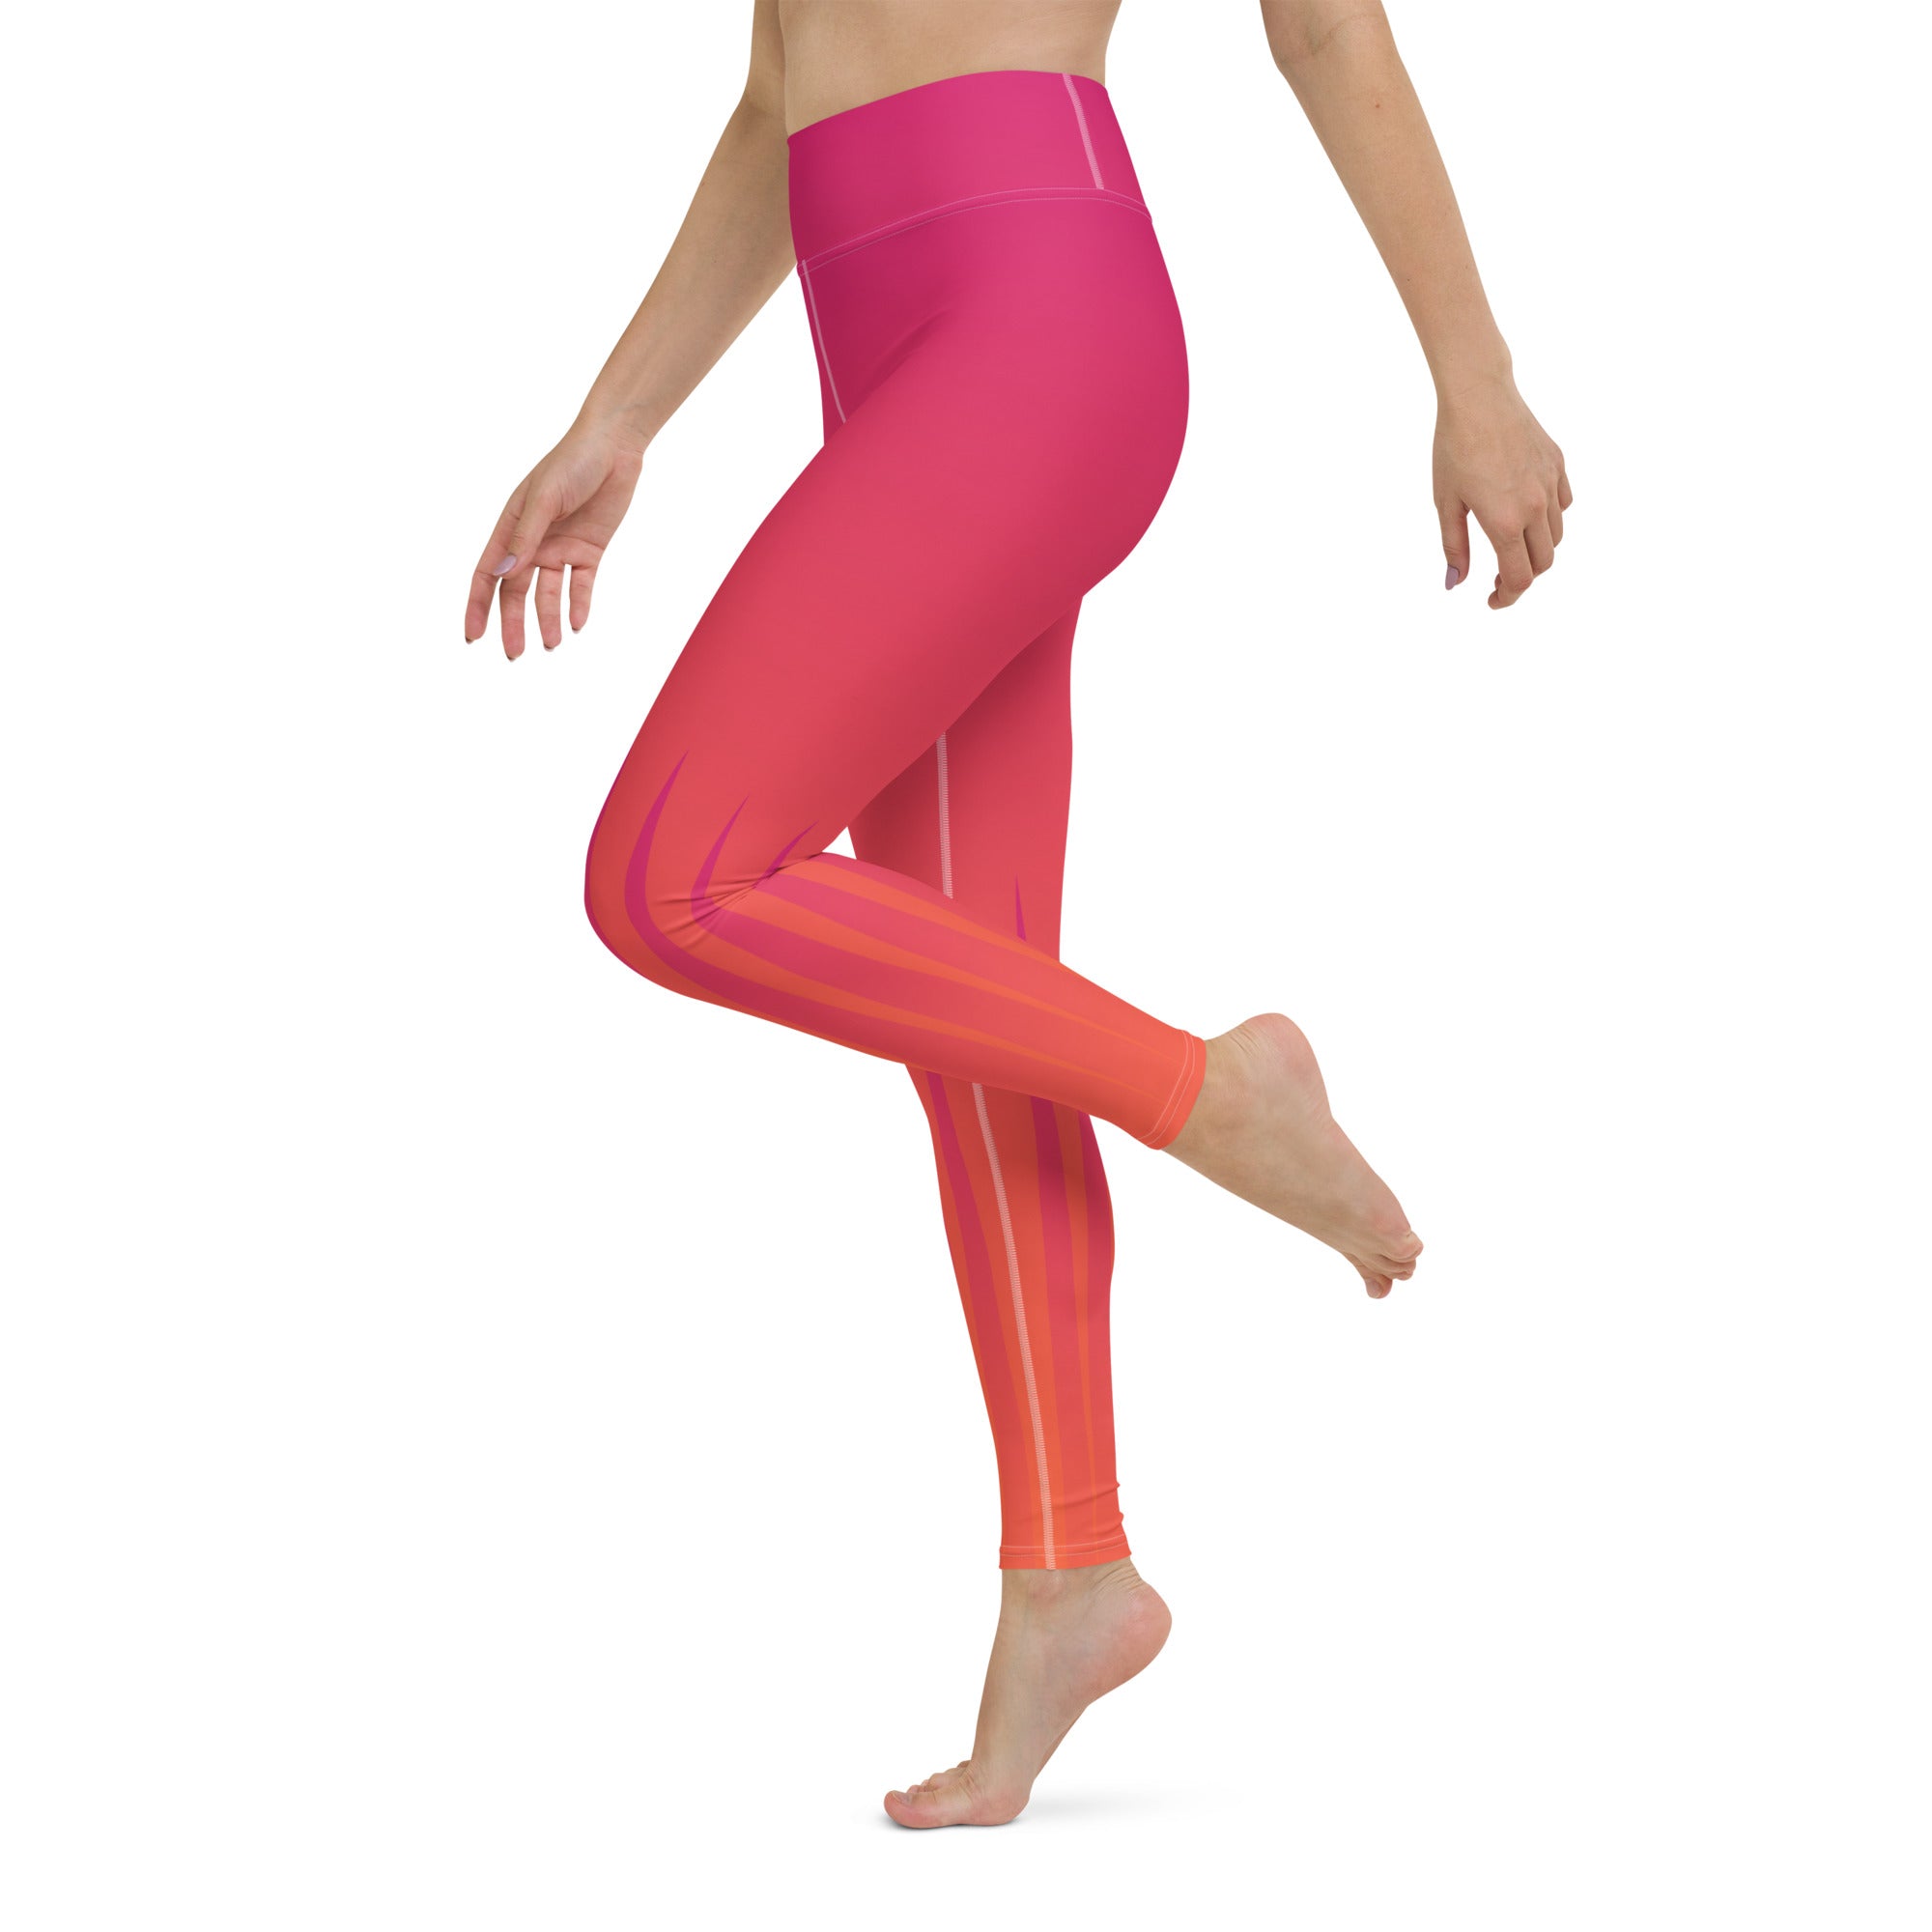 Embrace the warm, soothing colors of a desert sunset in your yoga practice with these Desert Dusk Leggings.